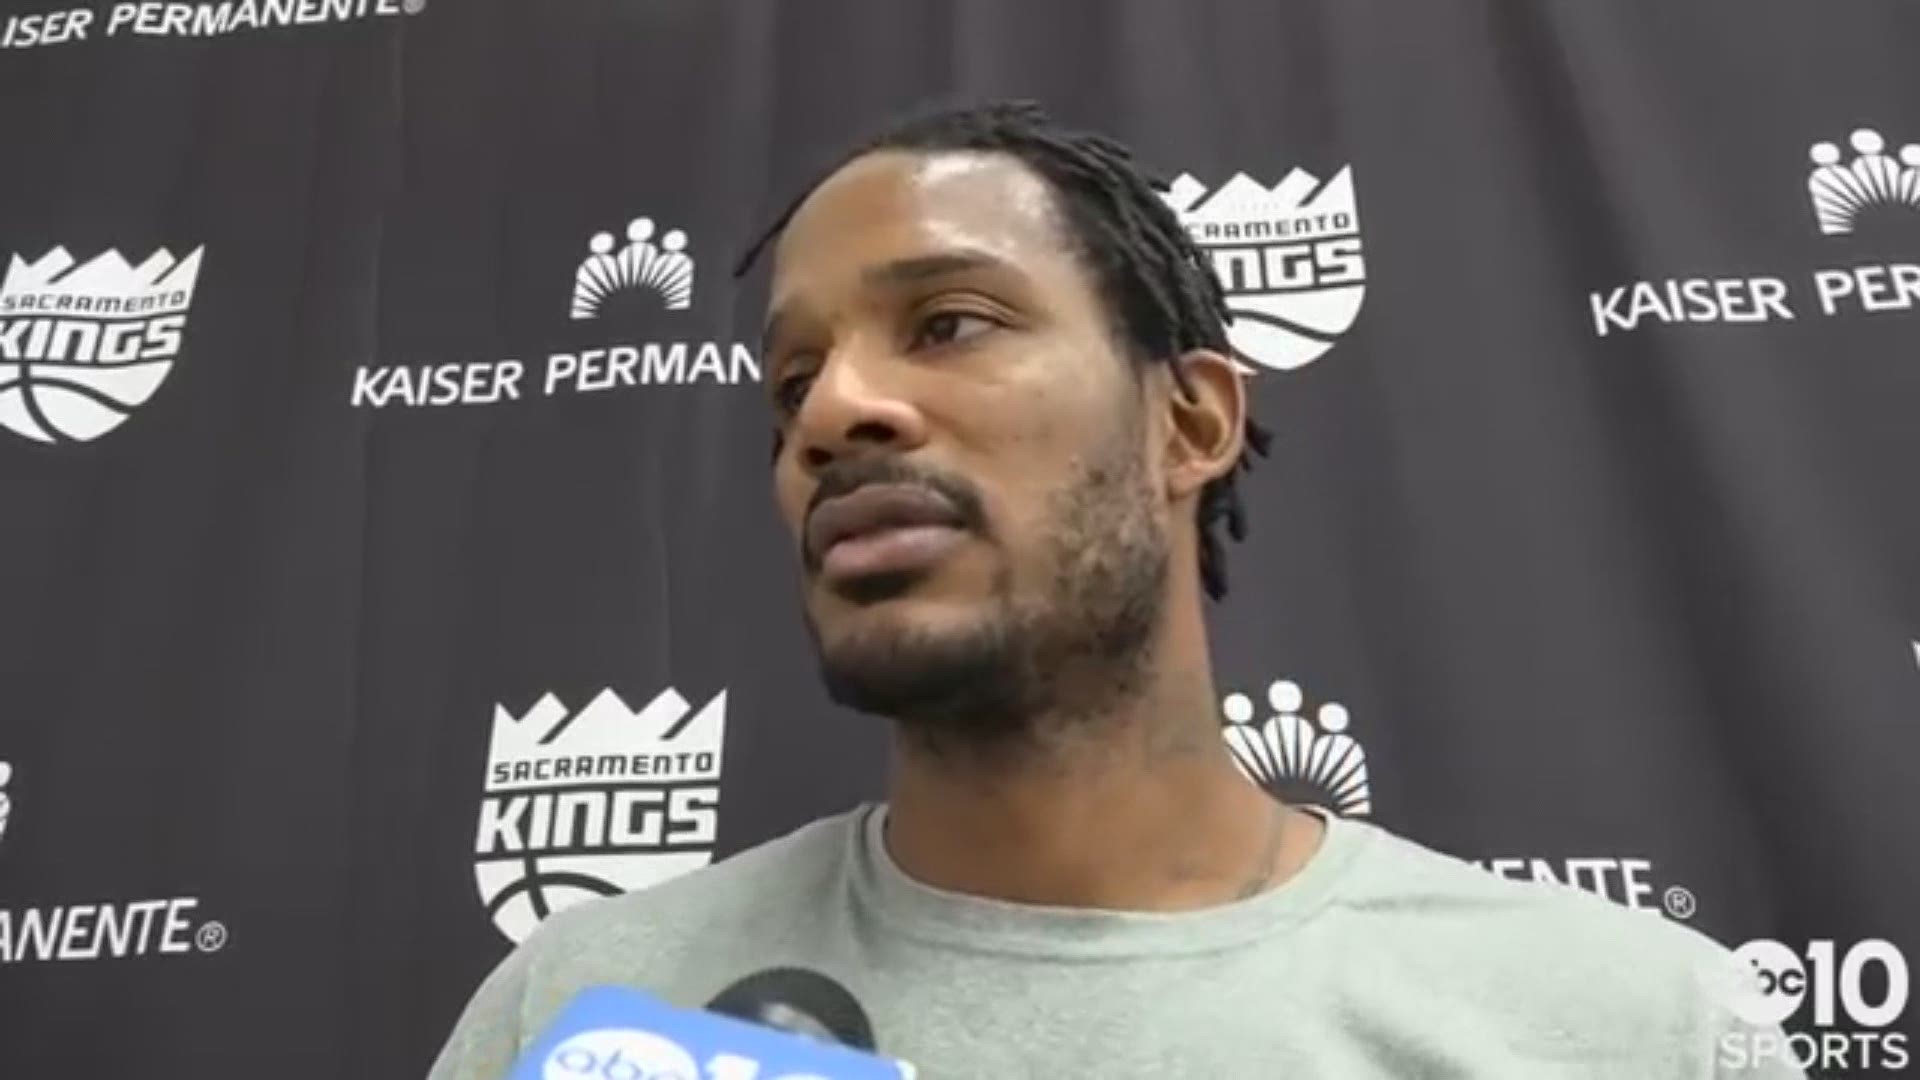 Sacramento Kings forward Trevor Ariza explains what his team has been missing during their 0-4 start to the new season and identifies some improvements he's seen.